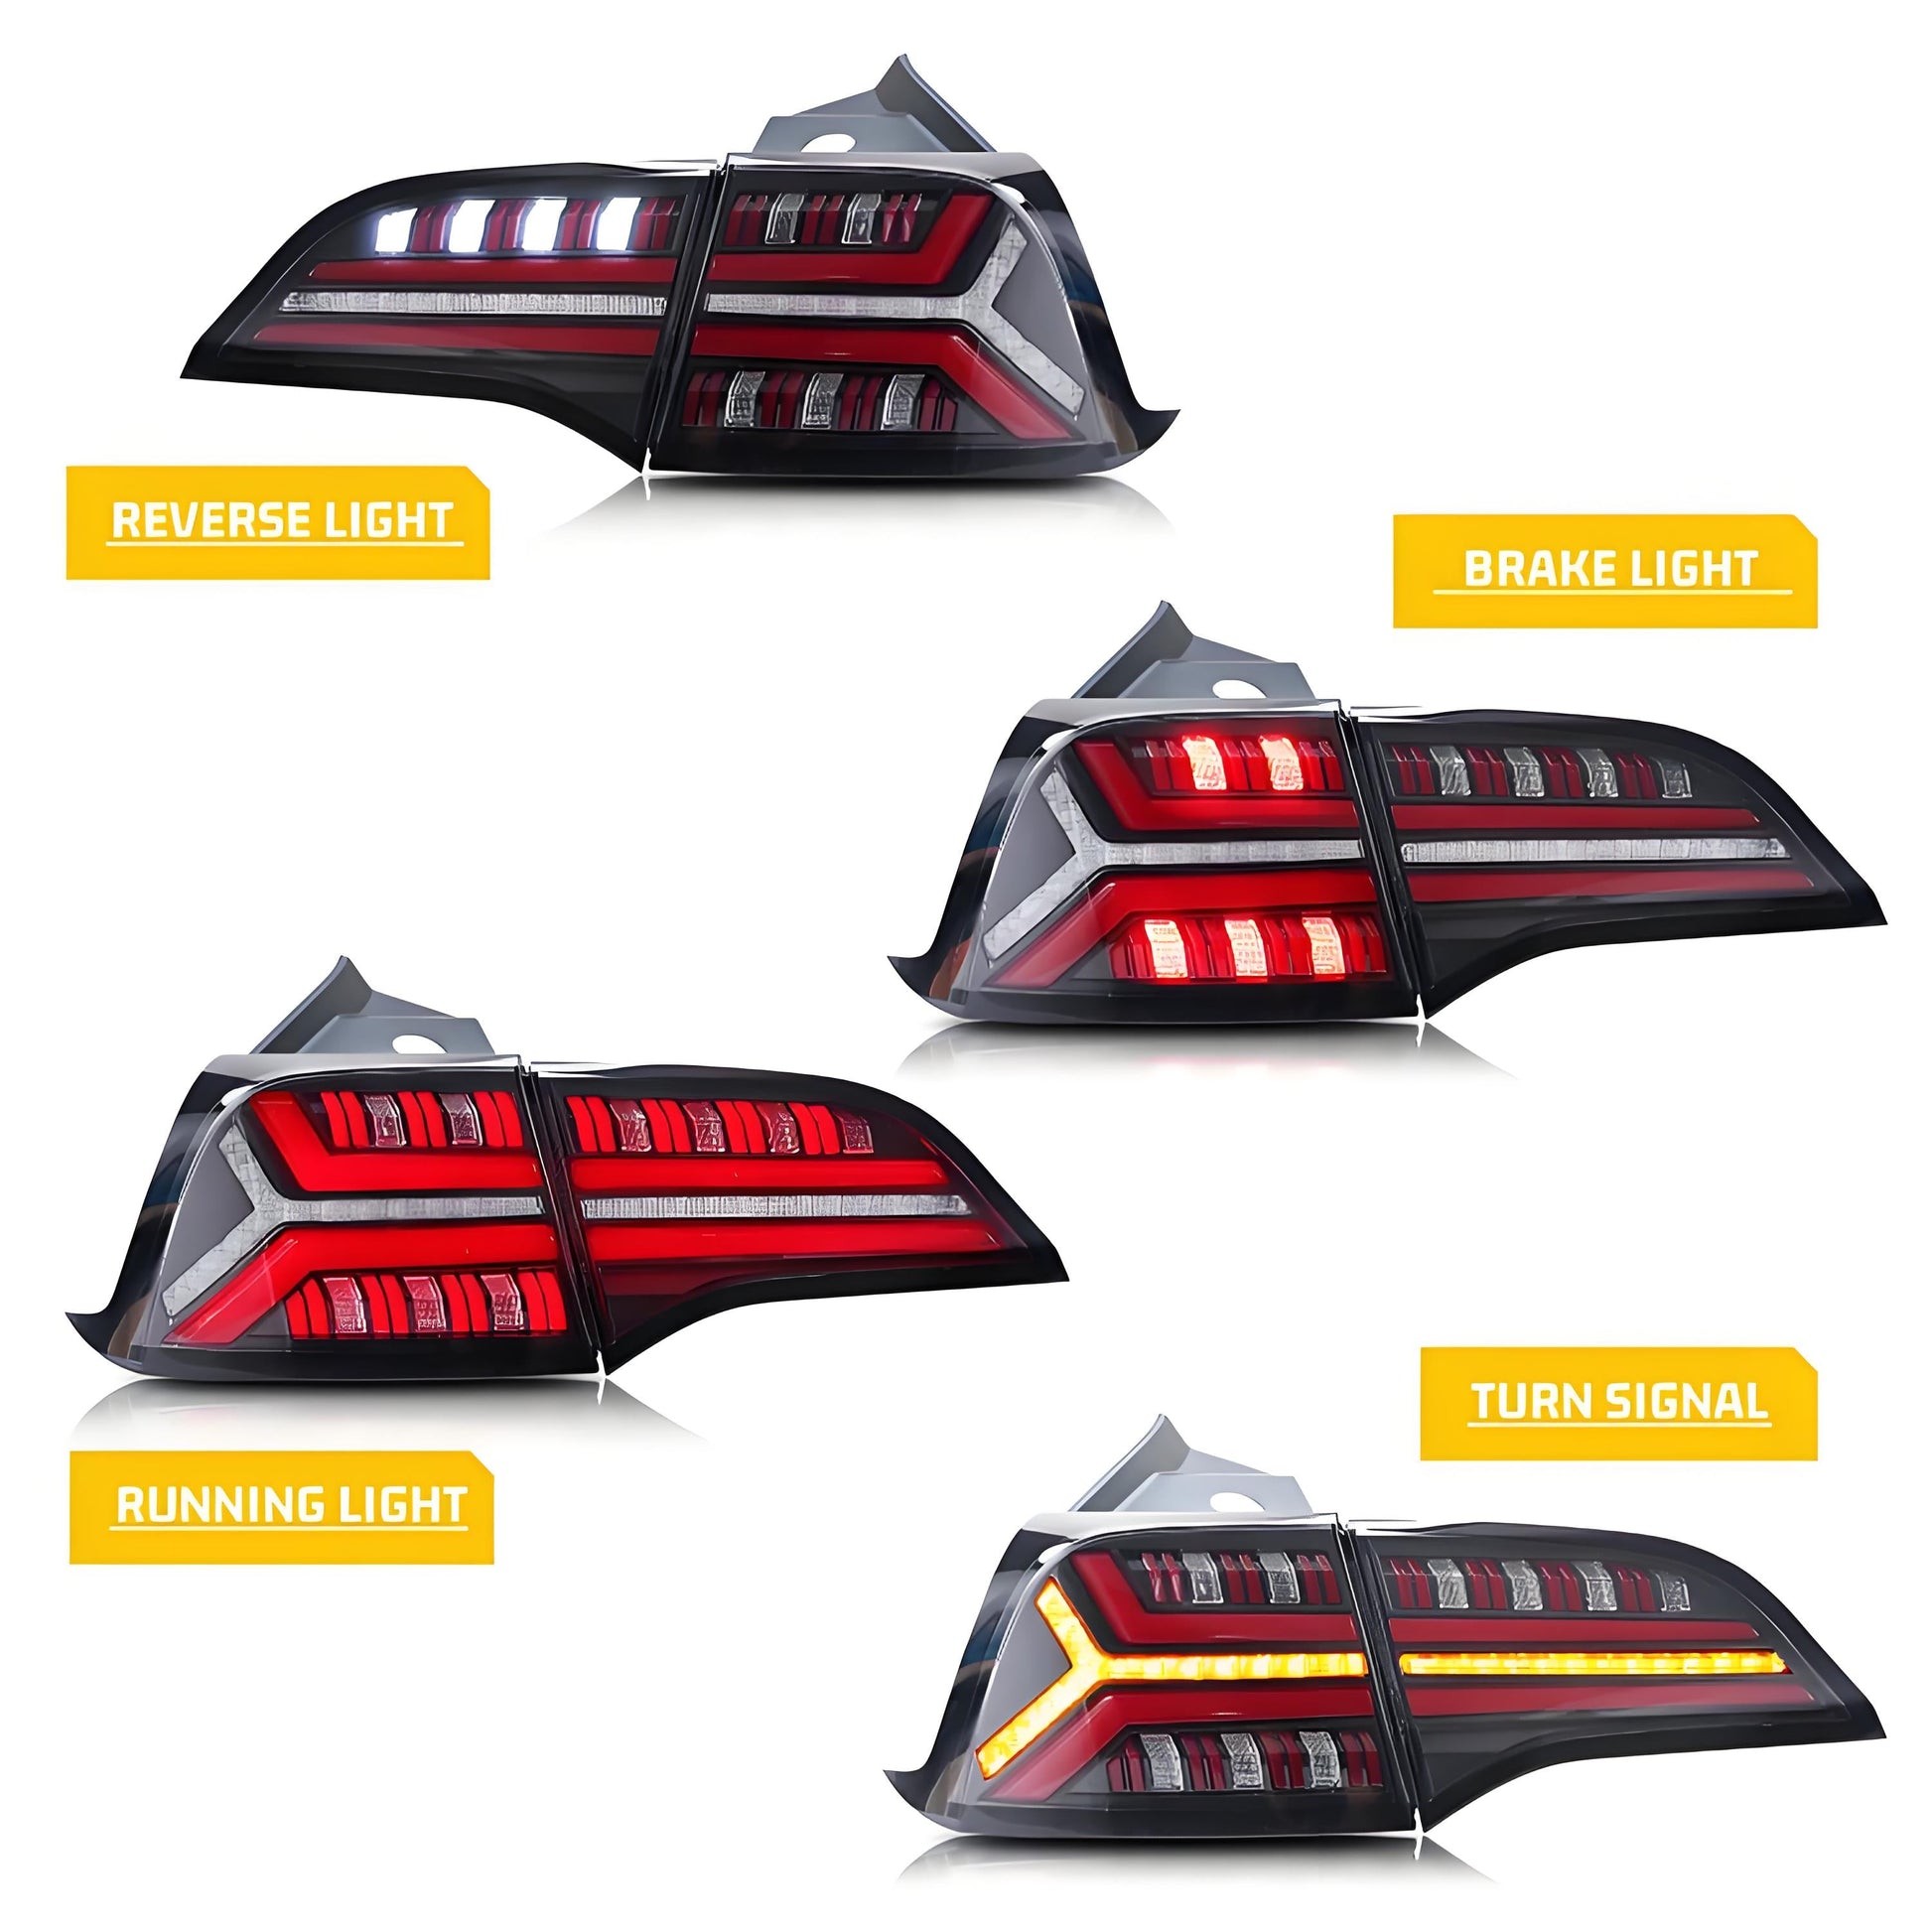 Fish Bone Tail Light For Tesla Model 3/Y - Tesery Official Store